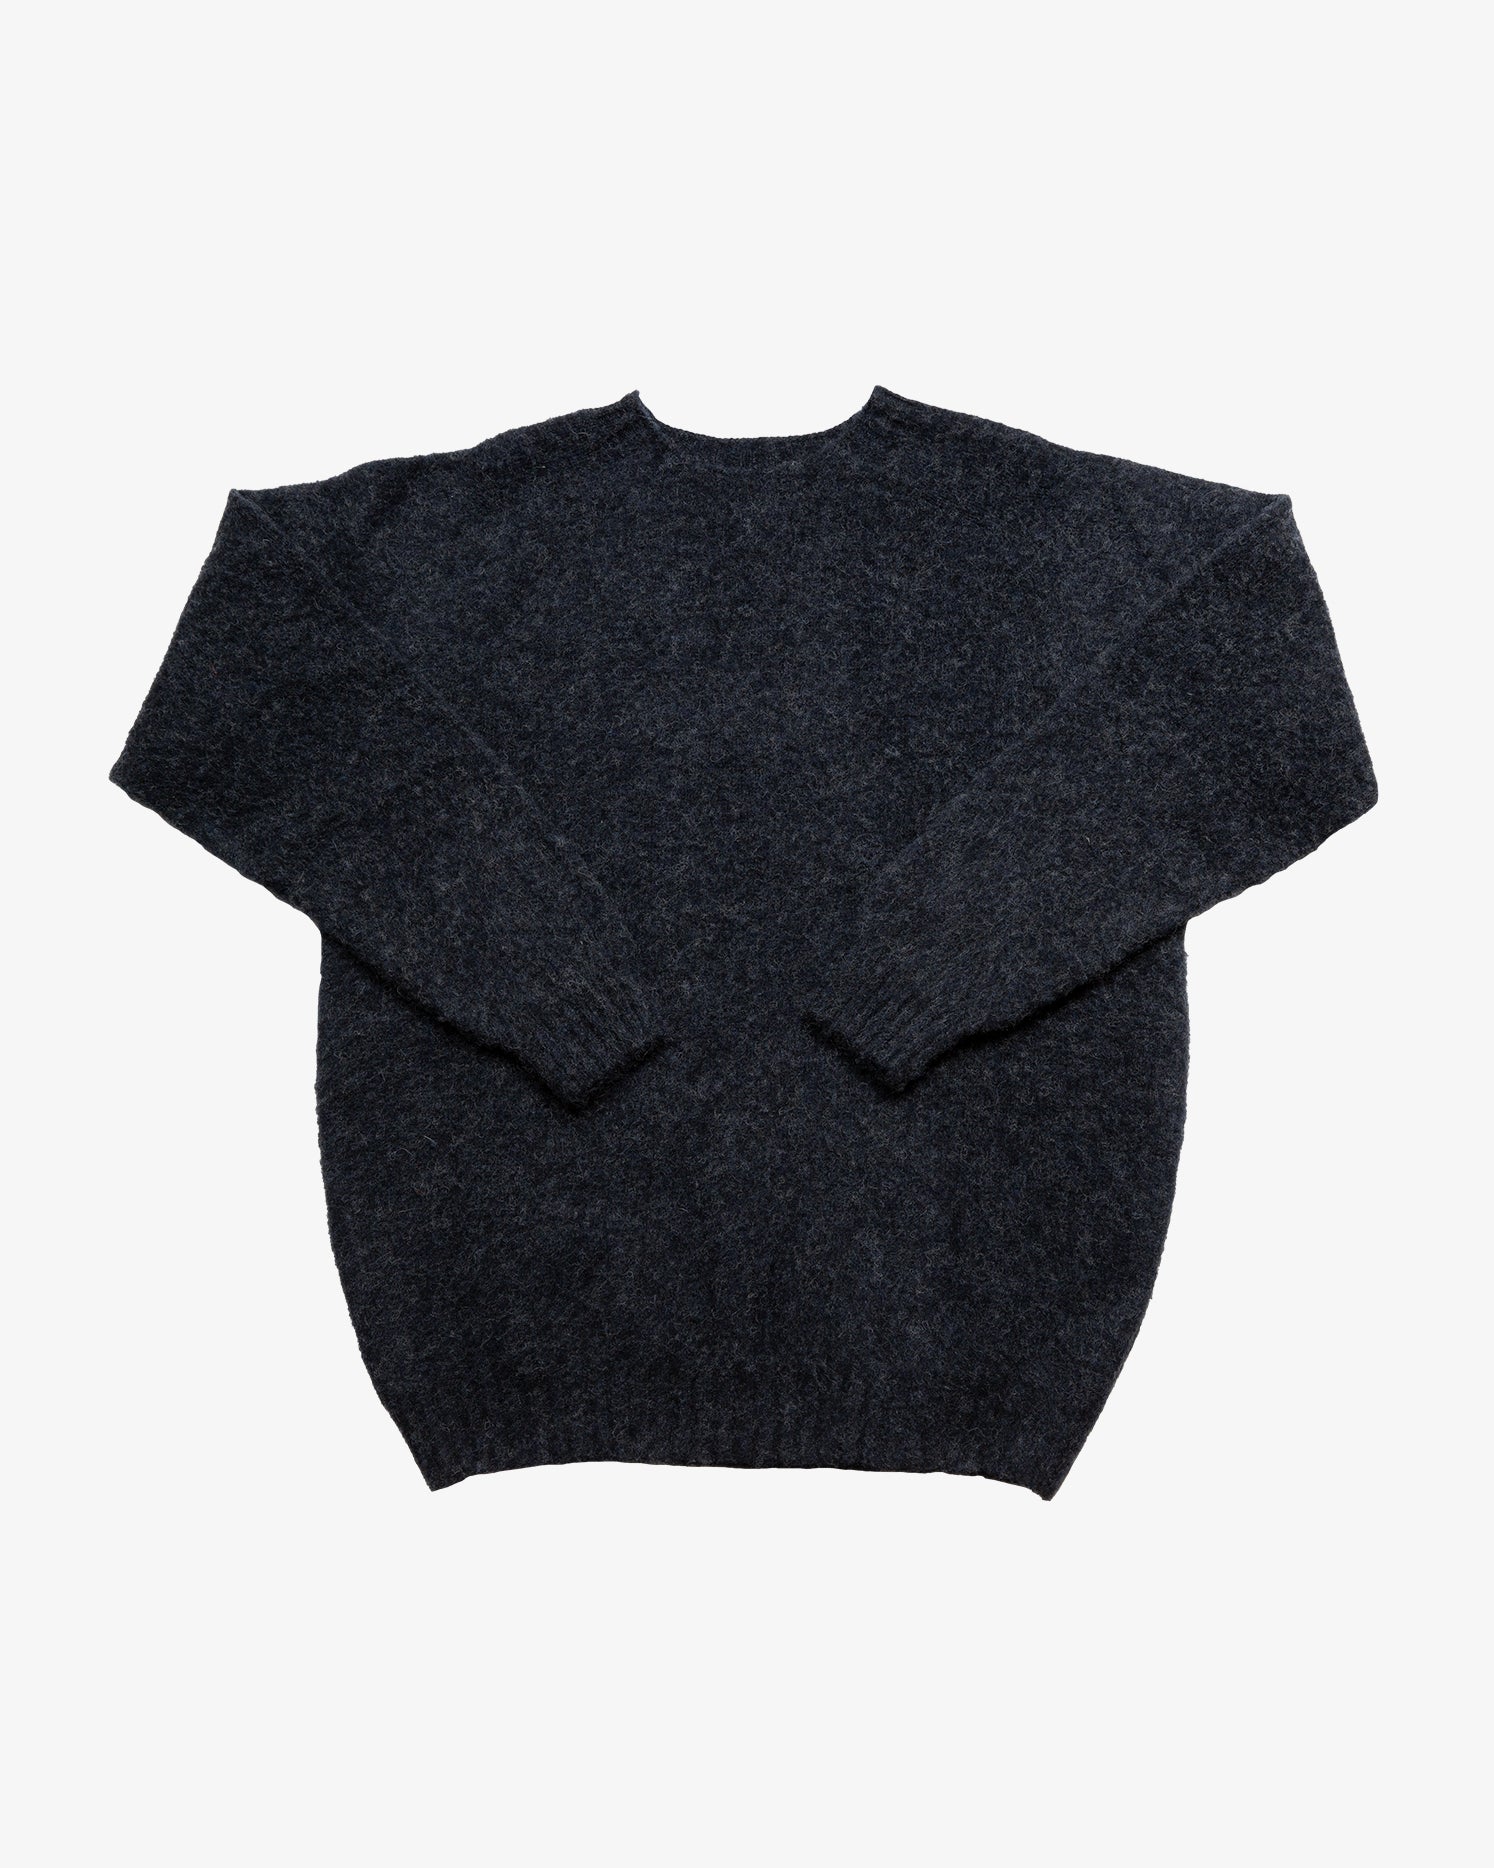 FITZROY SWEATER - DOUBLE BRUSHED CHARCOAL